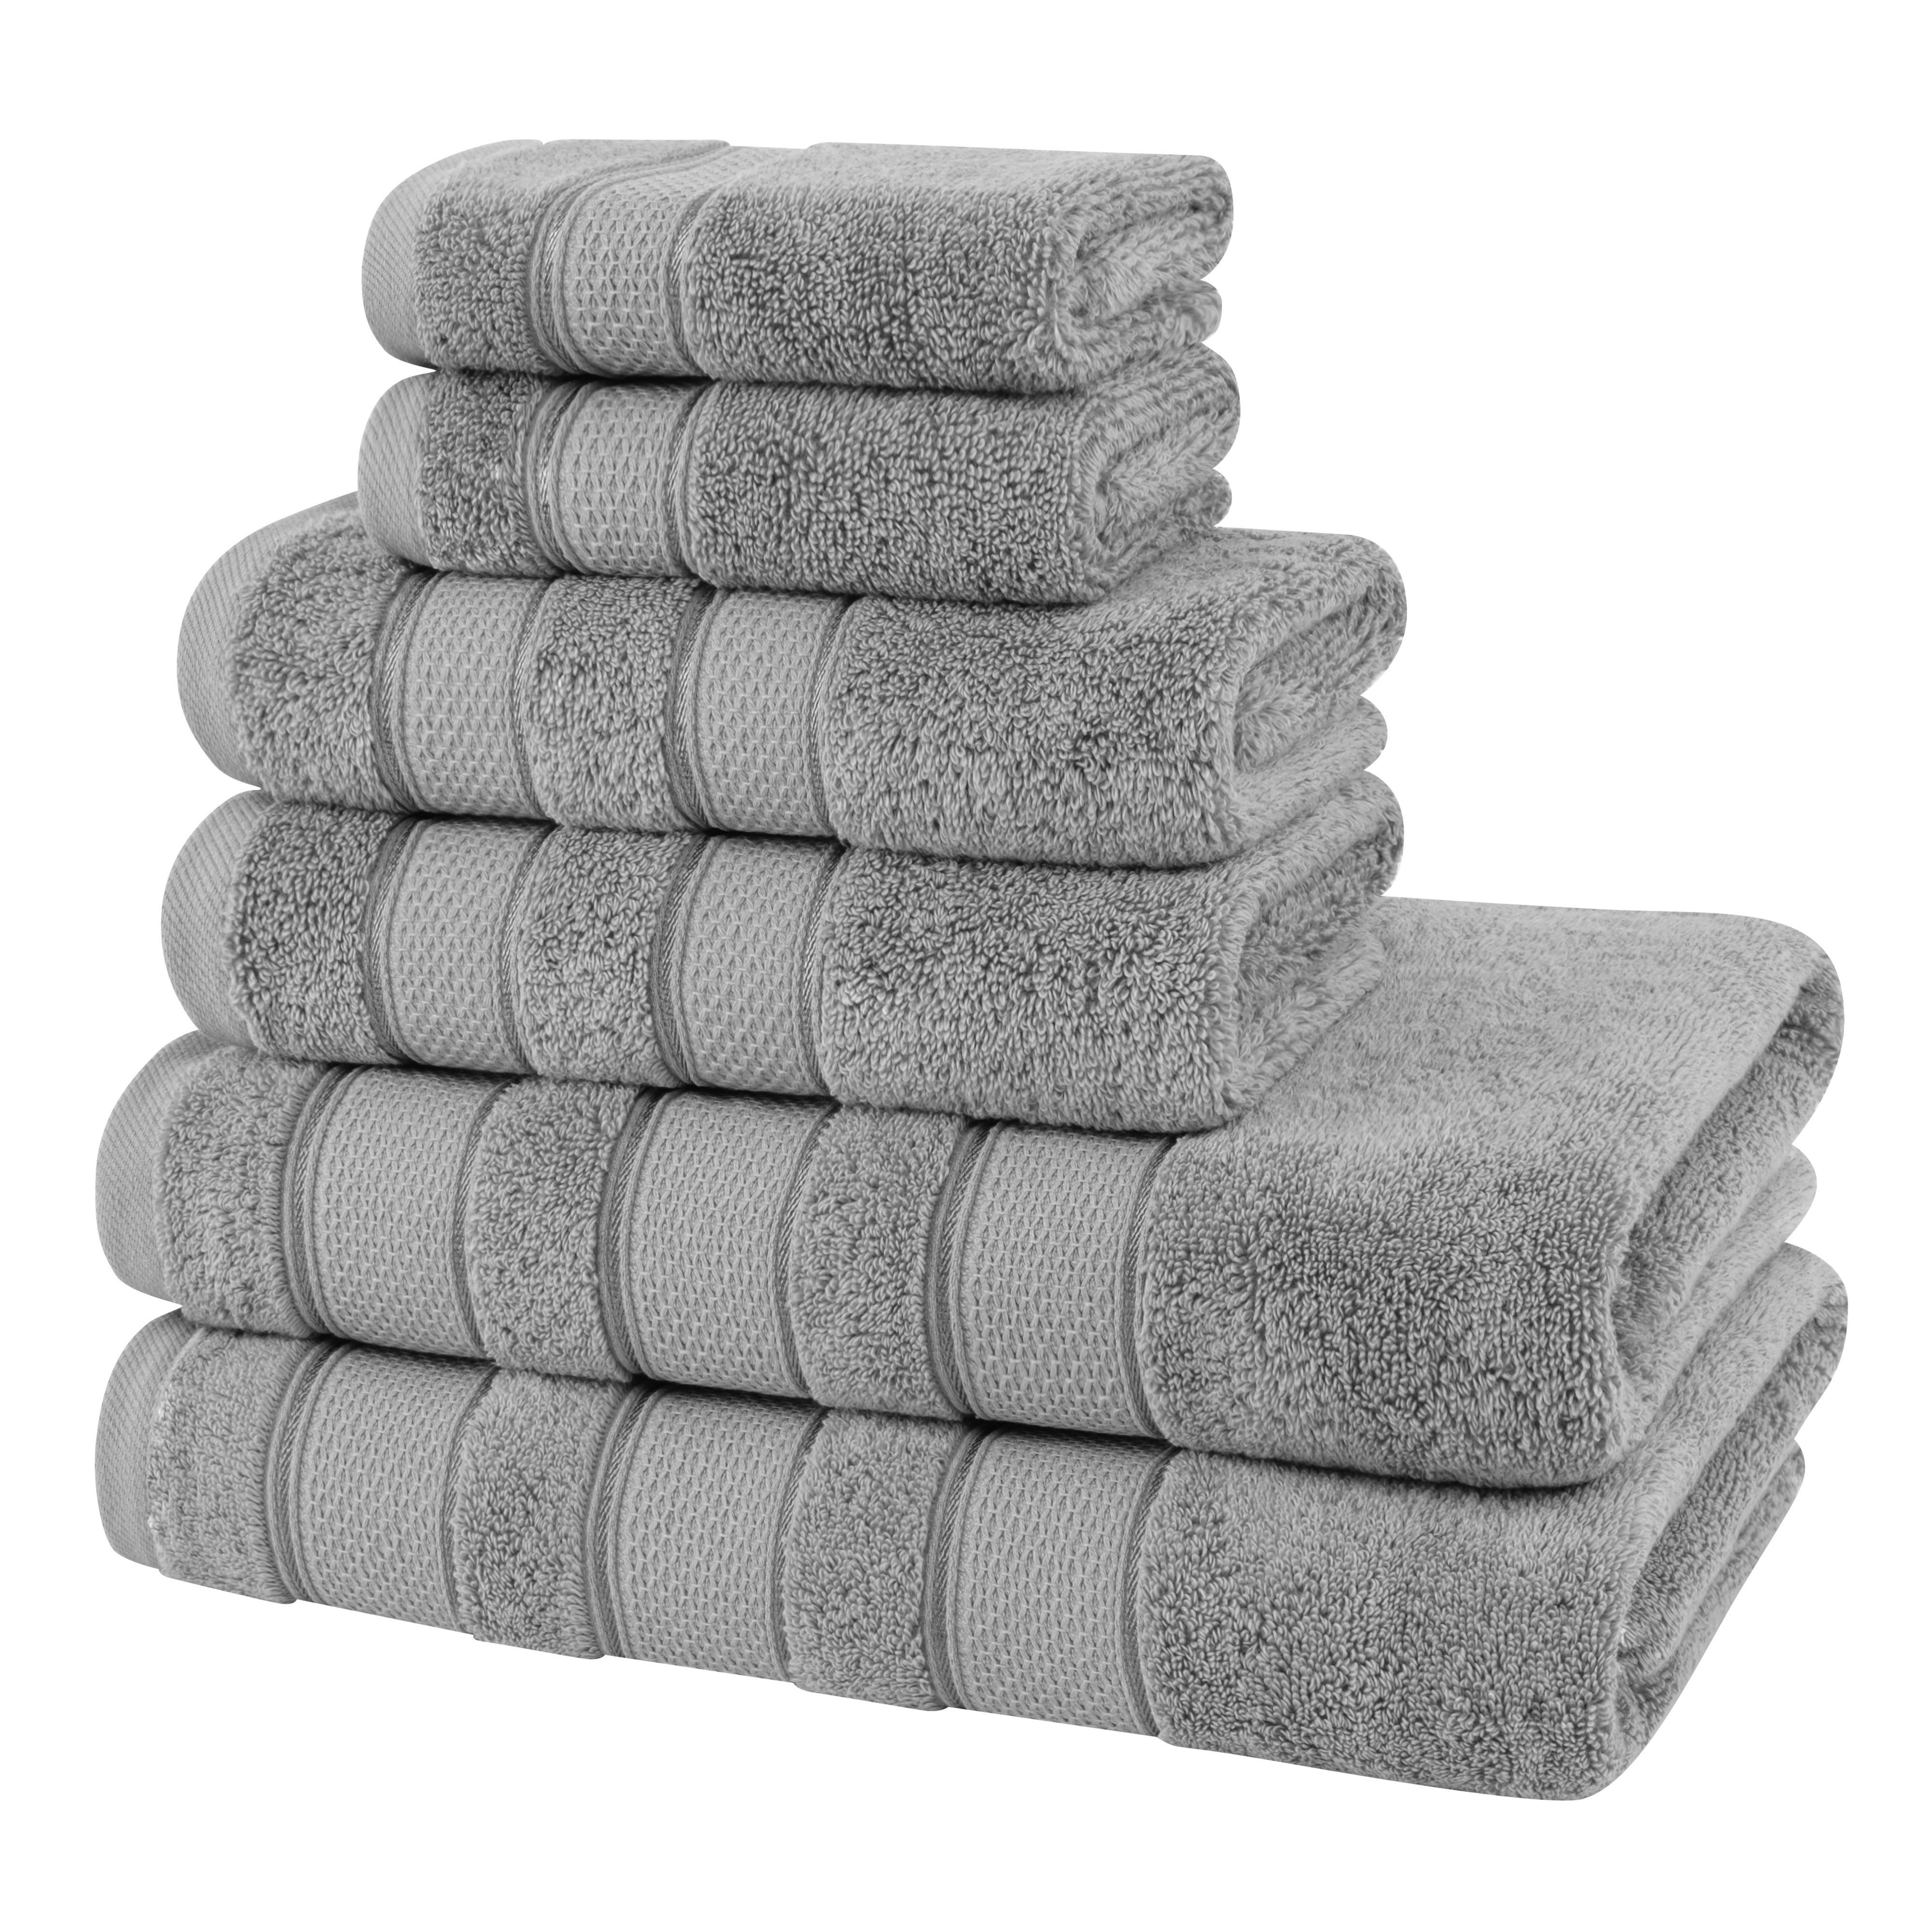 Luxury Thick Cotton Hand Bath Towels Bathroom Home Quick Dry SPA Towel - 1  Each